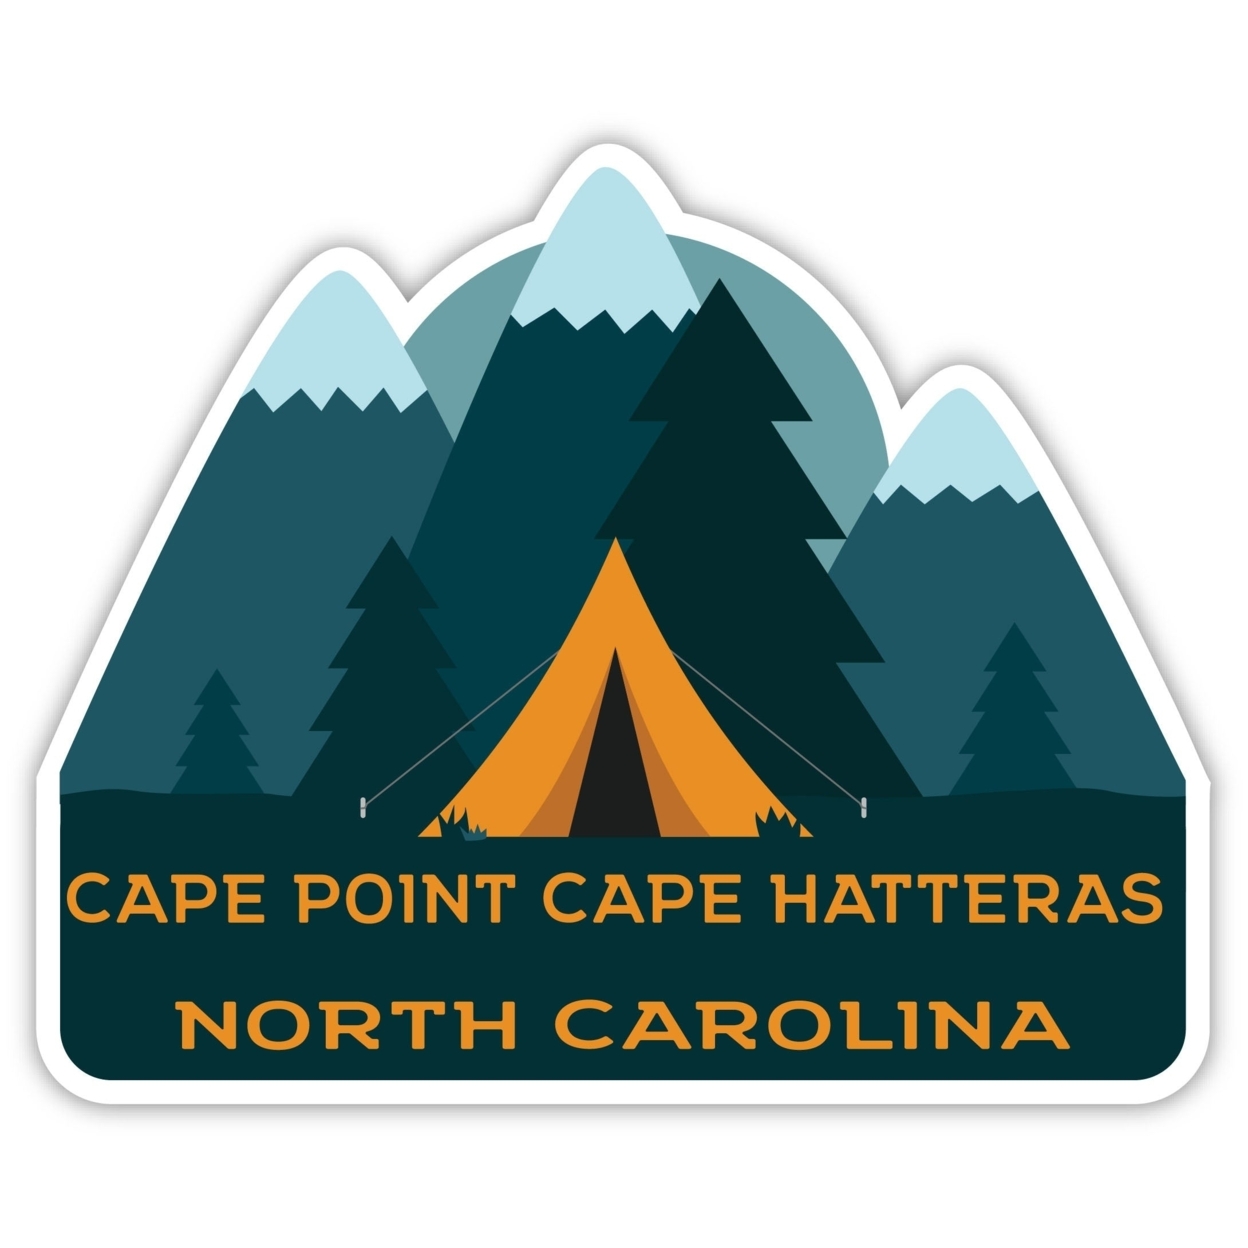 Cape Point Cape Hatteras North Carolina Souvenir Decorative Stickers (Choose Theme And Size) - 4-Pack, 10-Inch, Tent